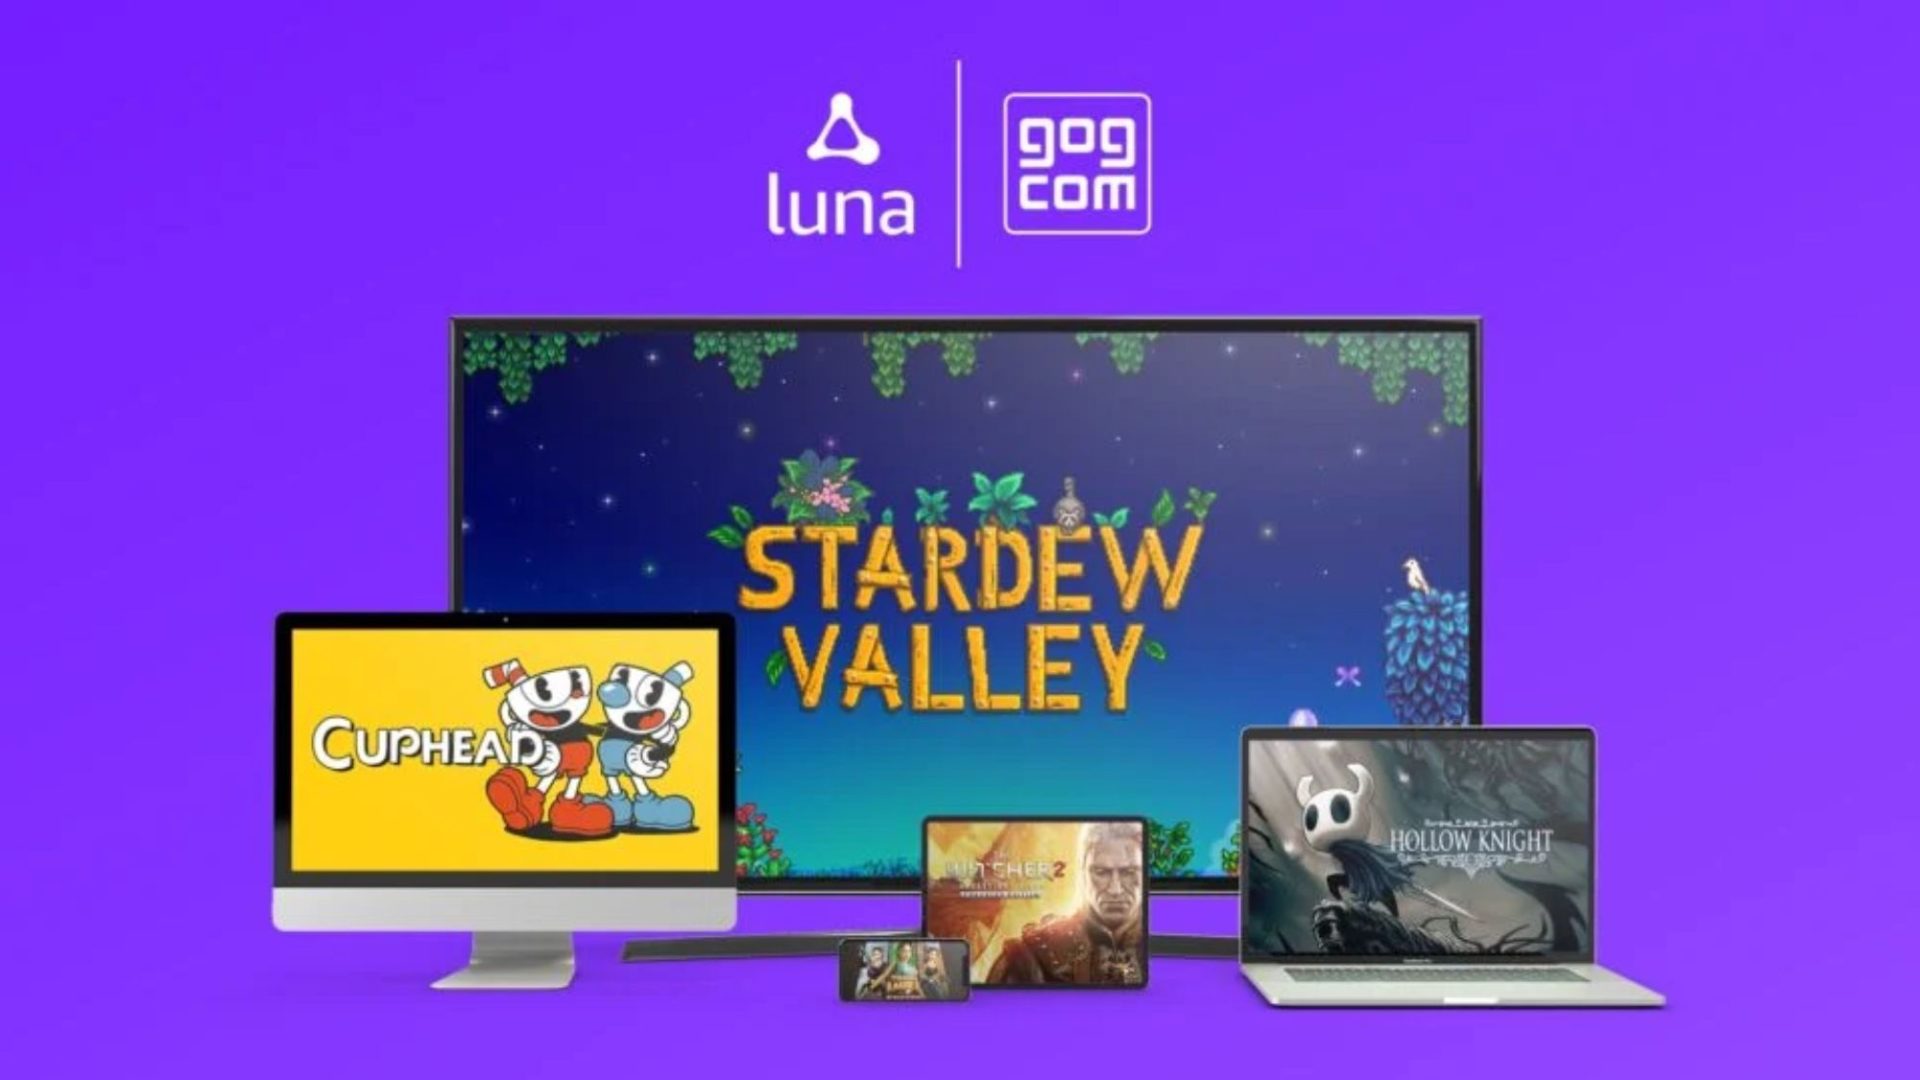 Amazon Luna expands availability to 3 more countries and adds new games from GOG, including Baldur’s Gate 3 and Stardew Valley